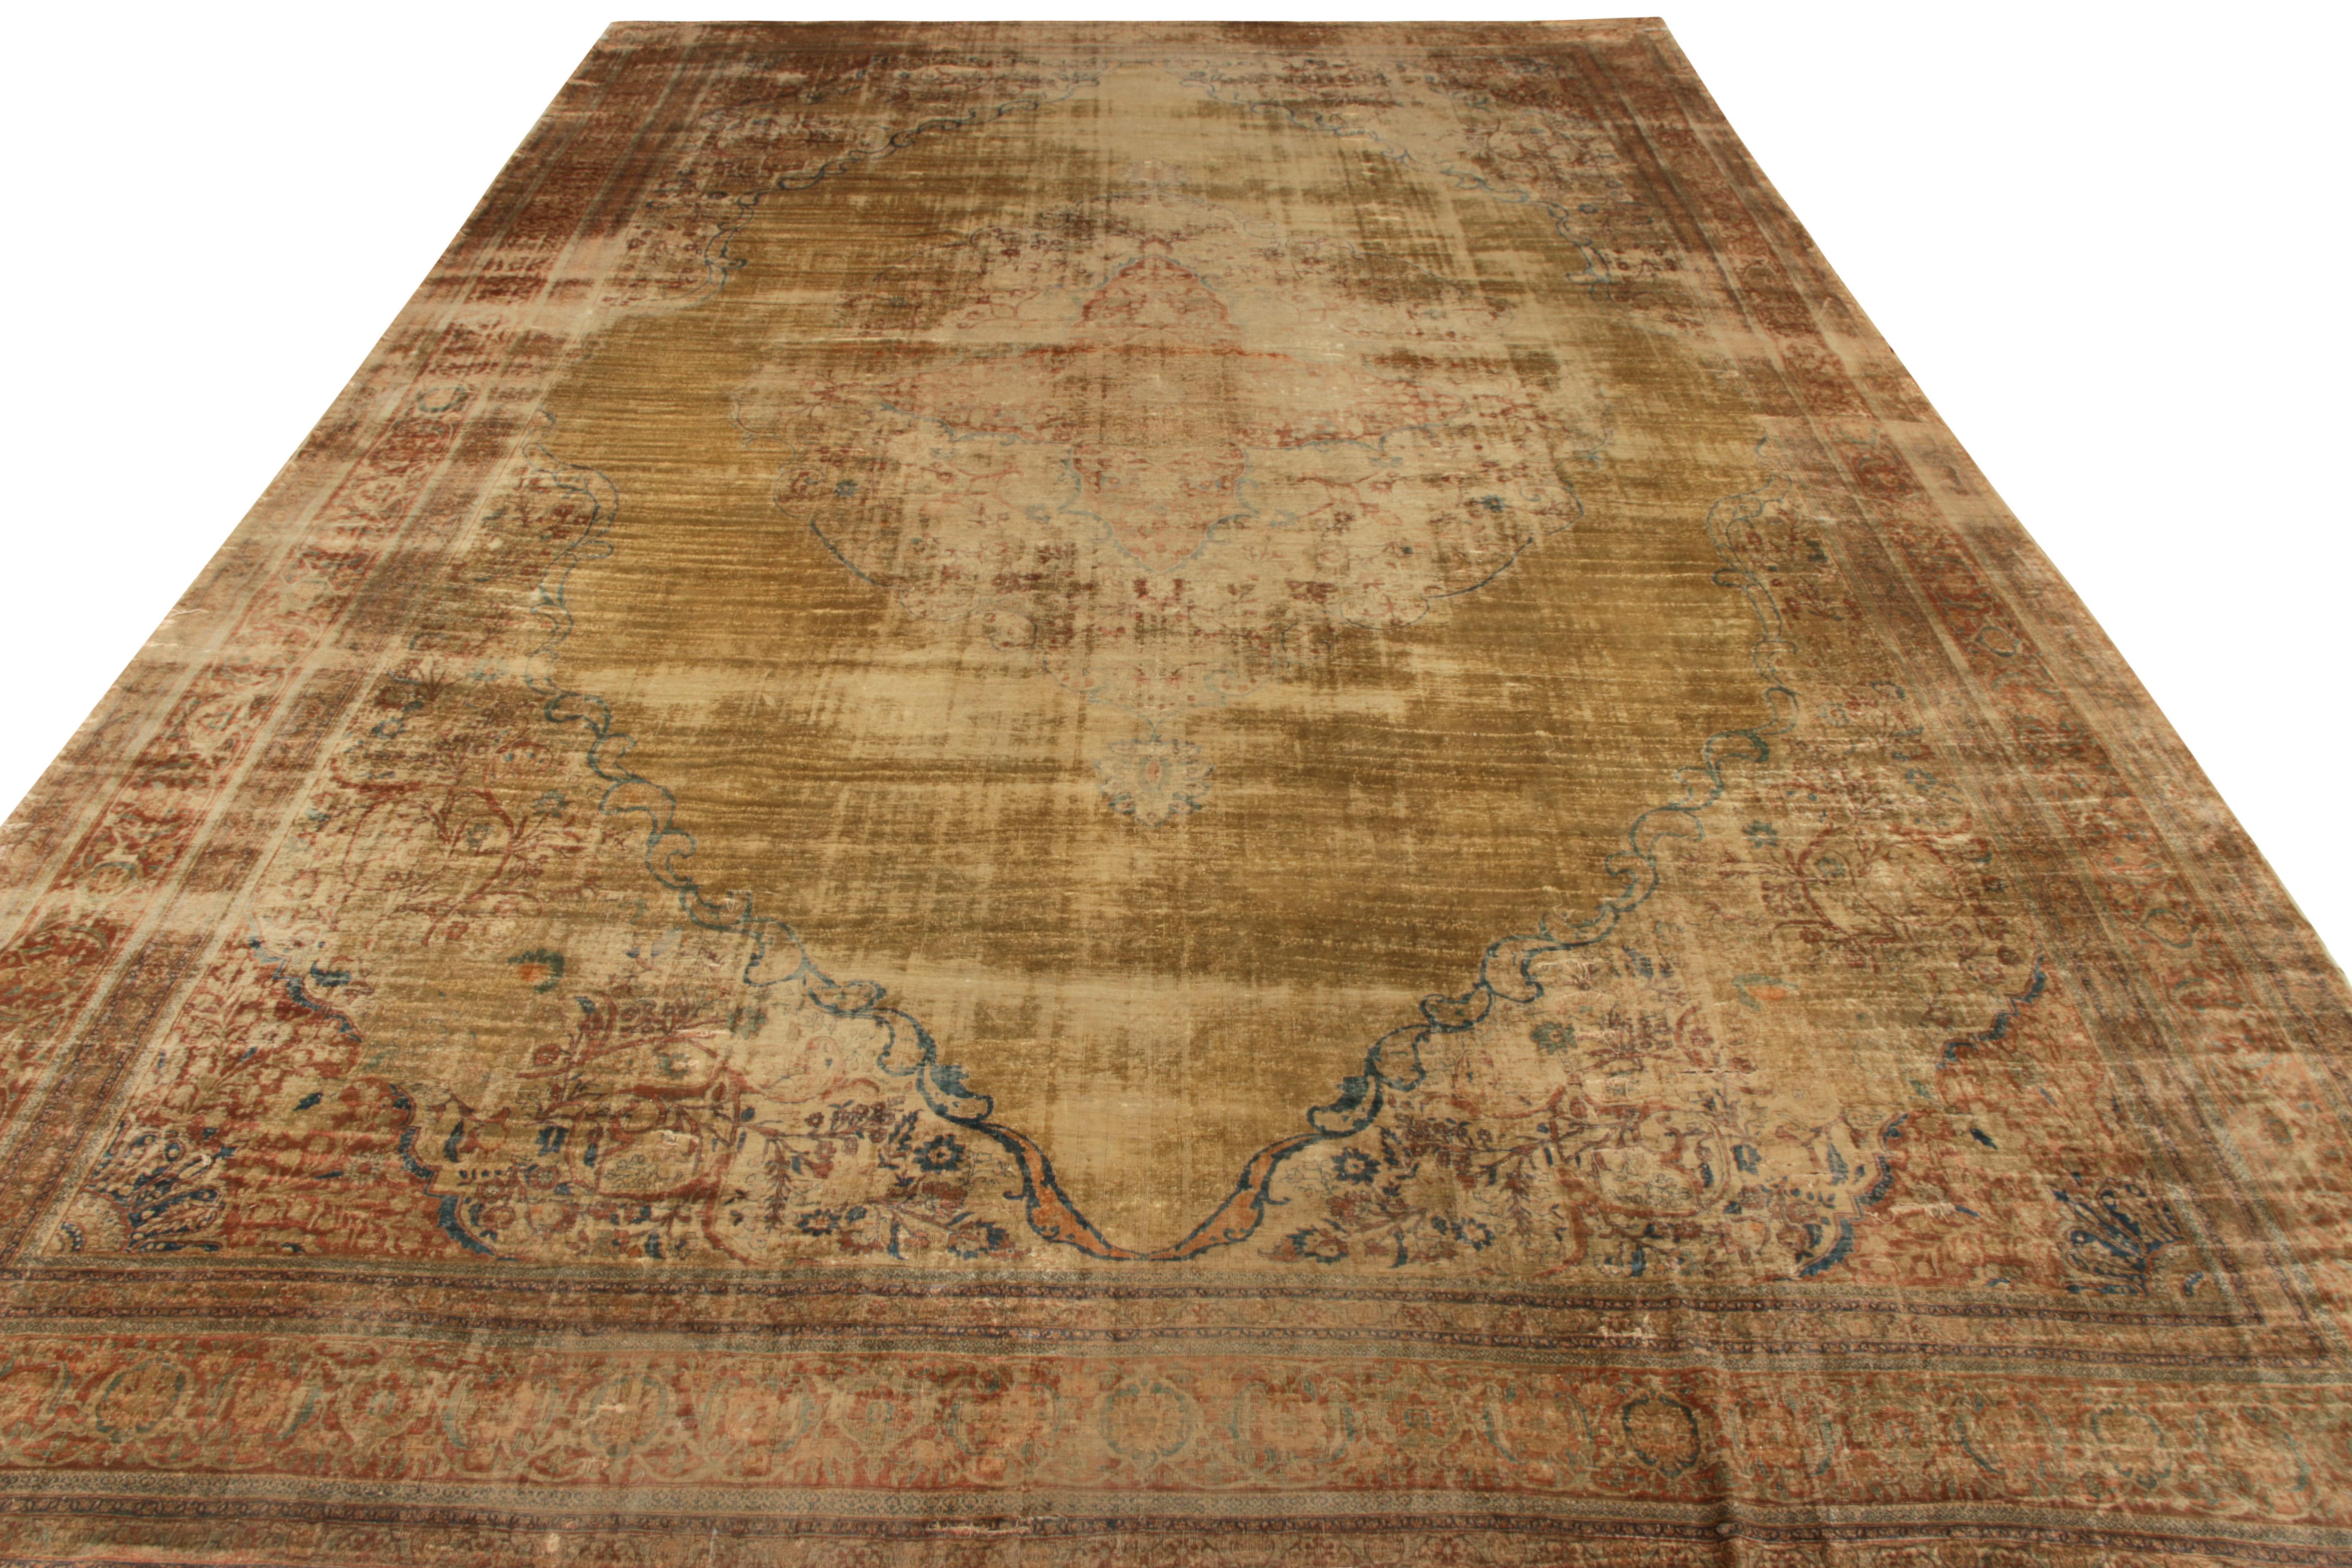 A luscious 11 x 17 drawing, this antique Persian rug of Tabriz lineage joins Rug & Kilim’s Antique & Vintage collection. Hand knotted in silk circa 1920-1930 and boasting a distinctive medallion pattern, the rug enjoys a regal gold background